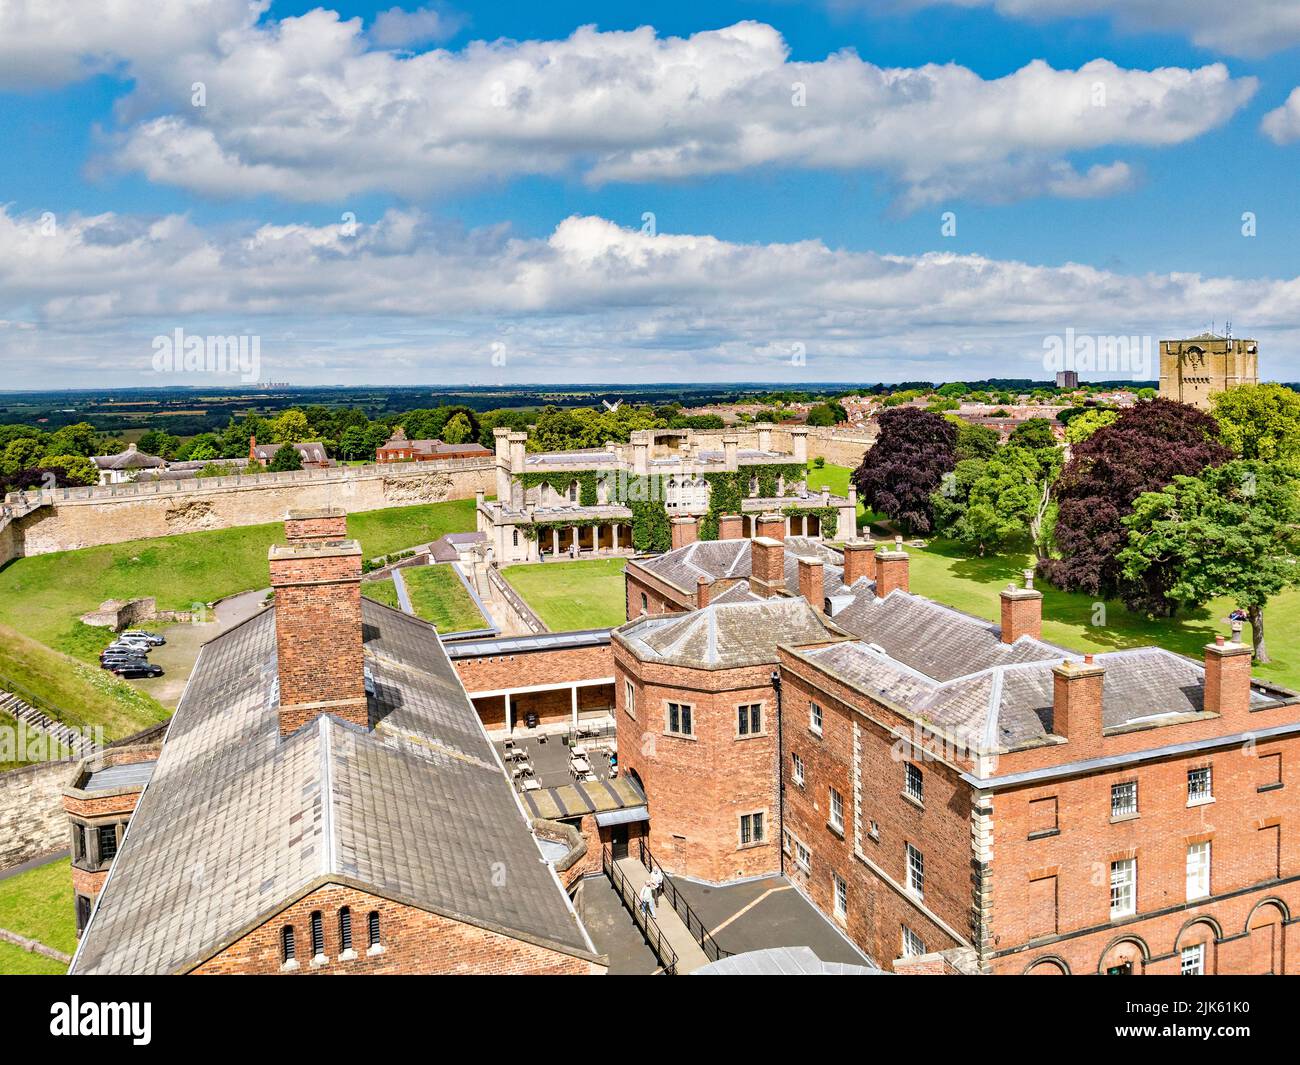 2 July 2019: Lincoln, UK - A view of the old gaol from the castle walls, with the Crown Court building, and a distant view to the Lincoln Wolds. Stock Photo